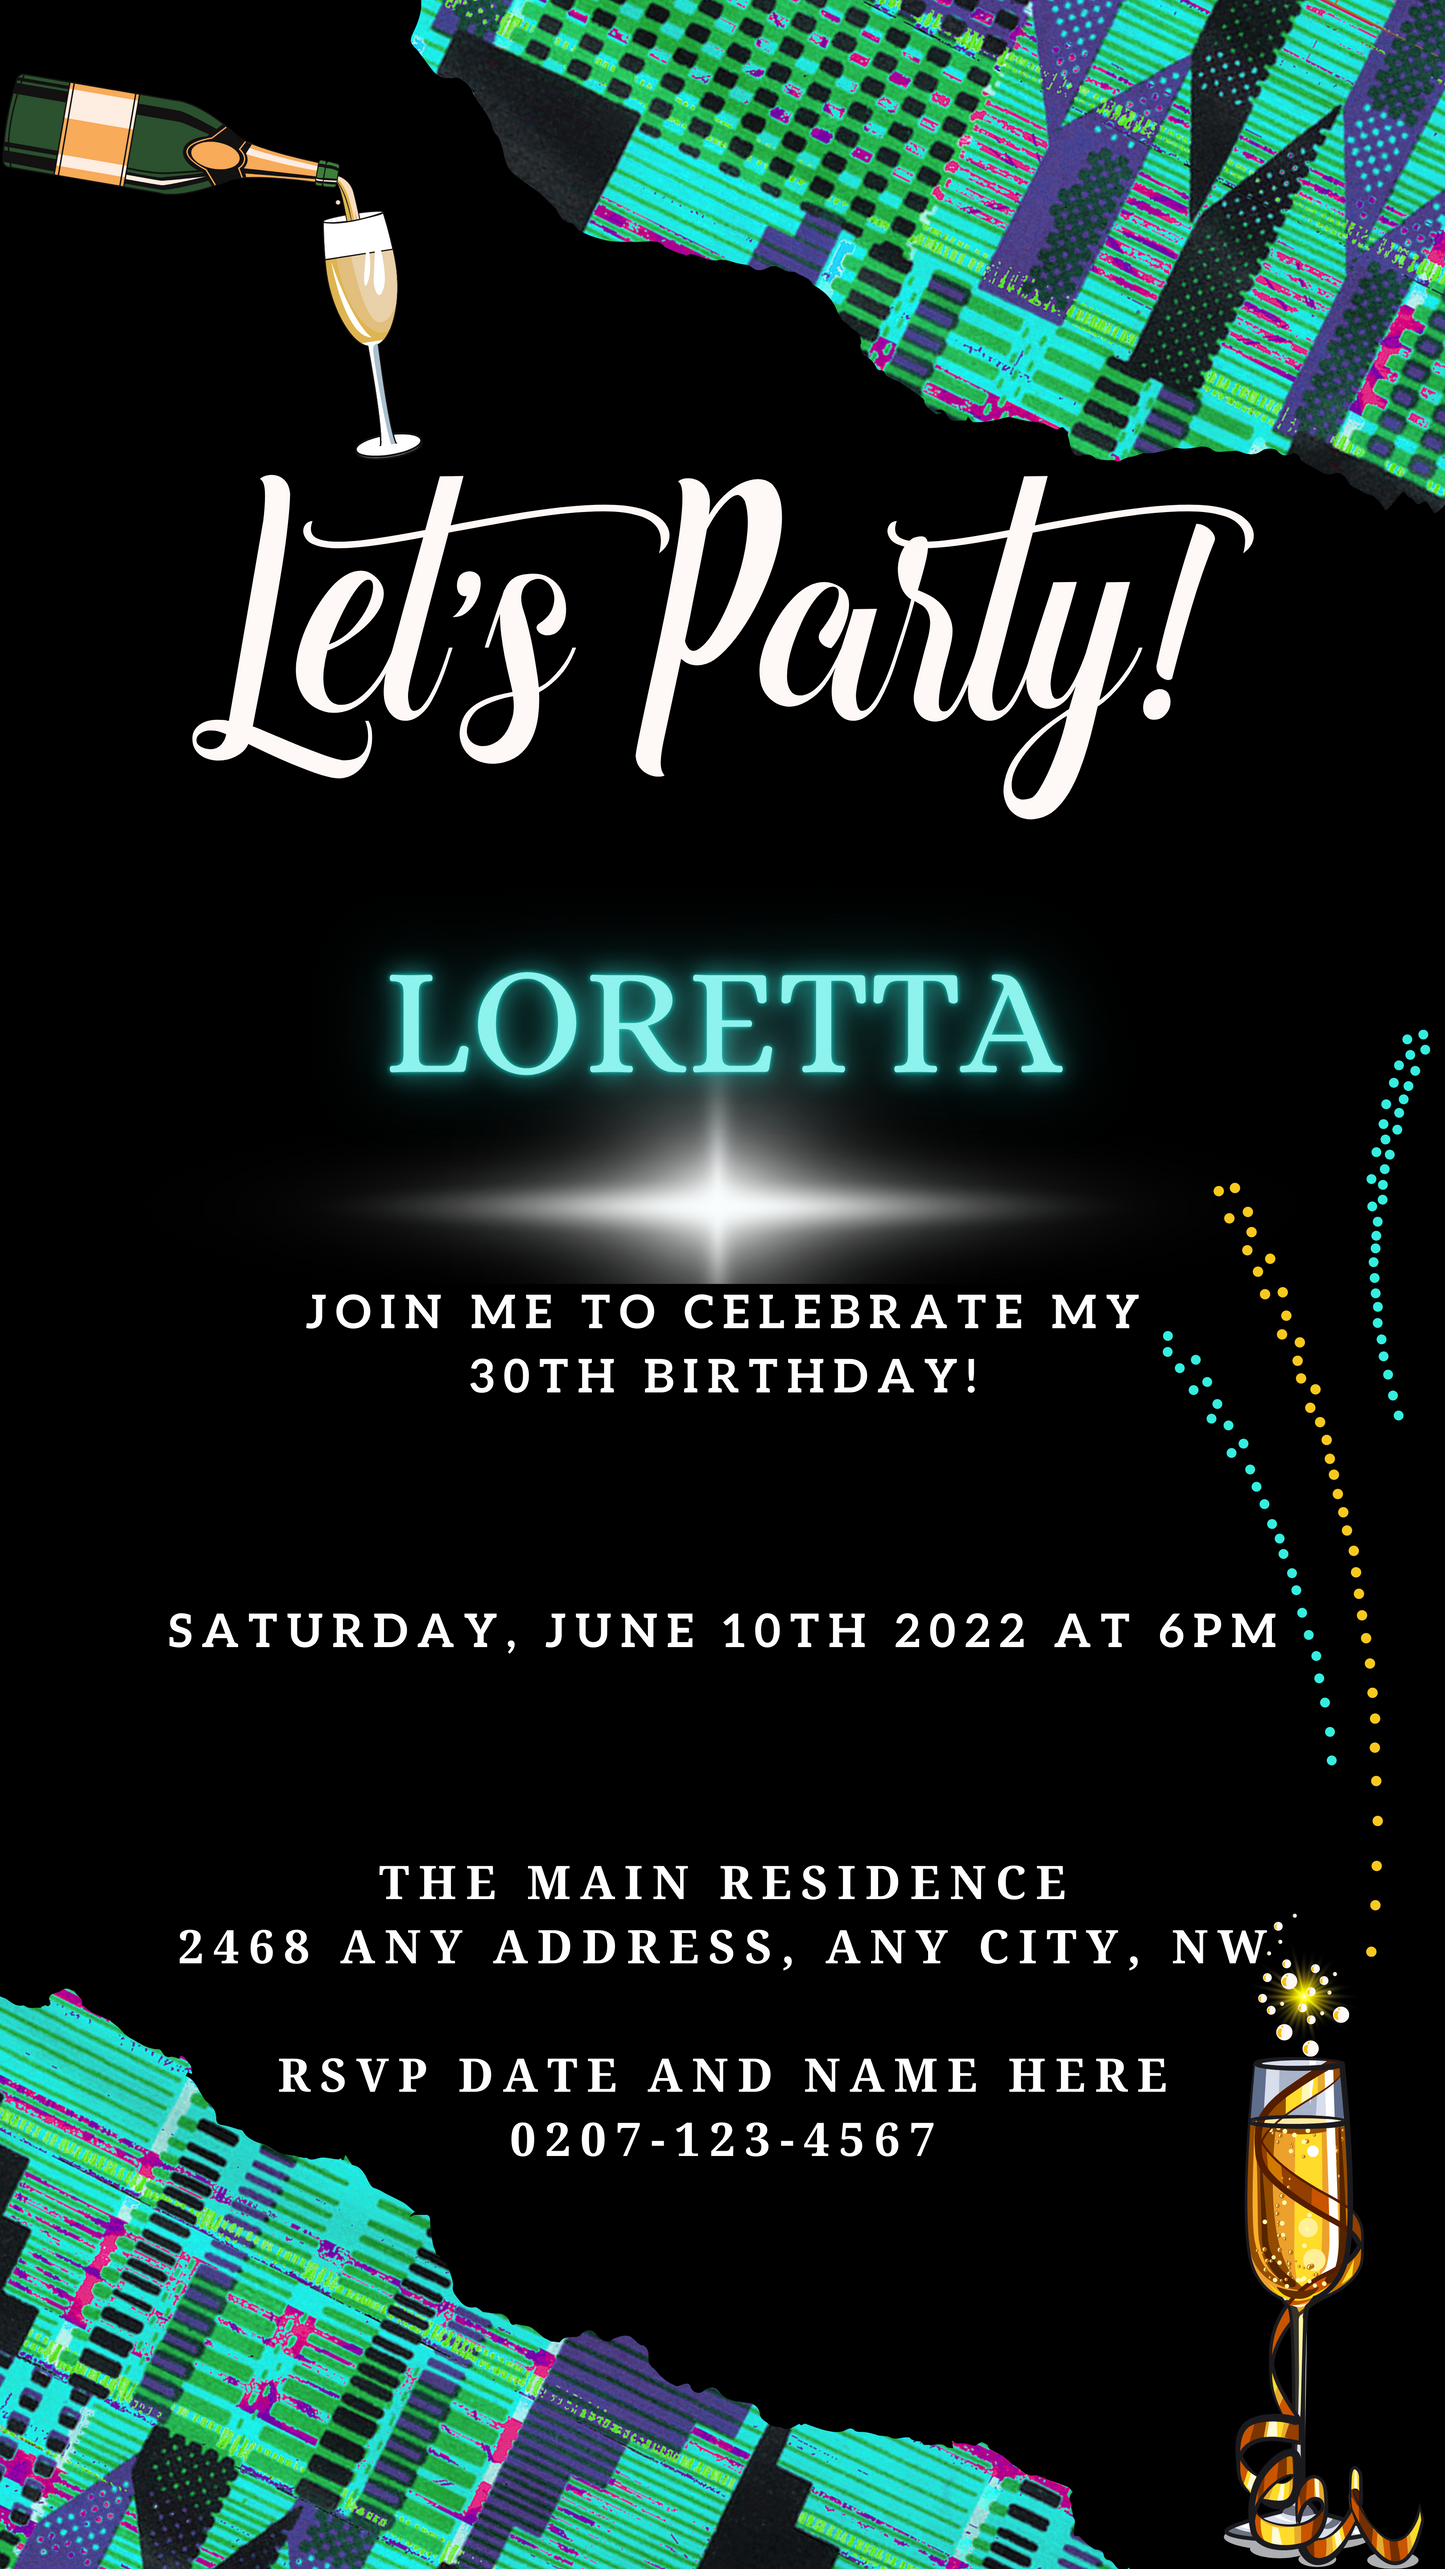 Teal Black African Kente customizable digital party evite with black and white text, colorful fireworks, and editable design elements for personalizing events.